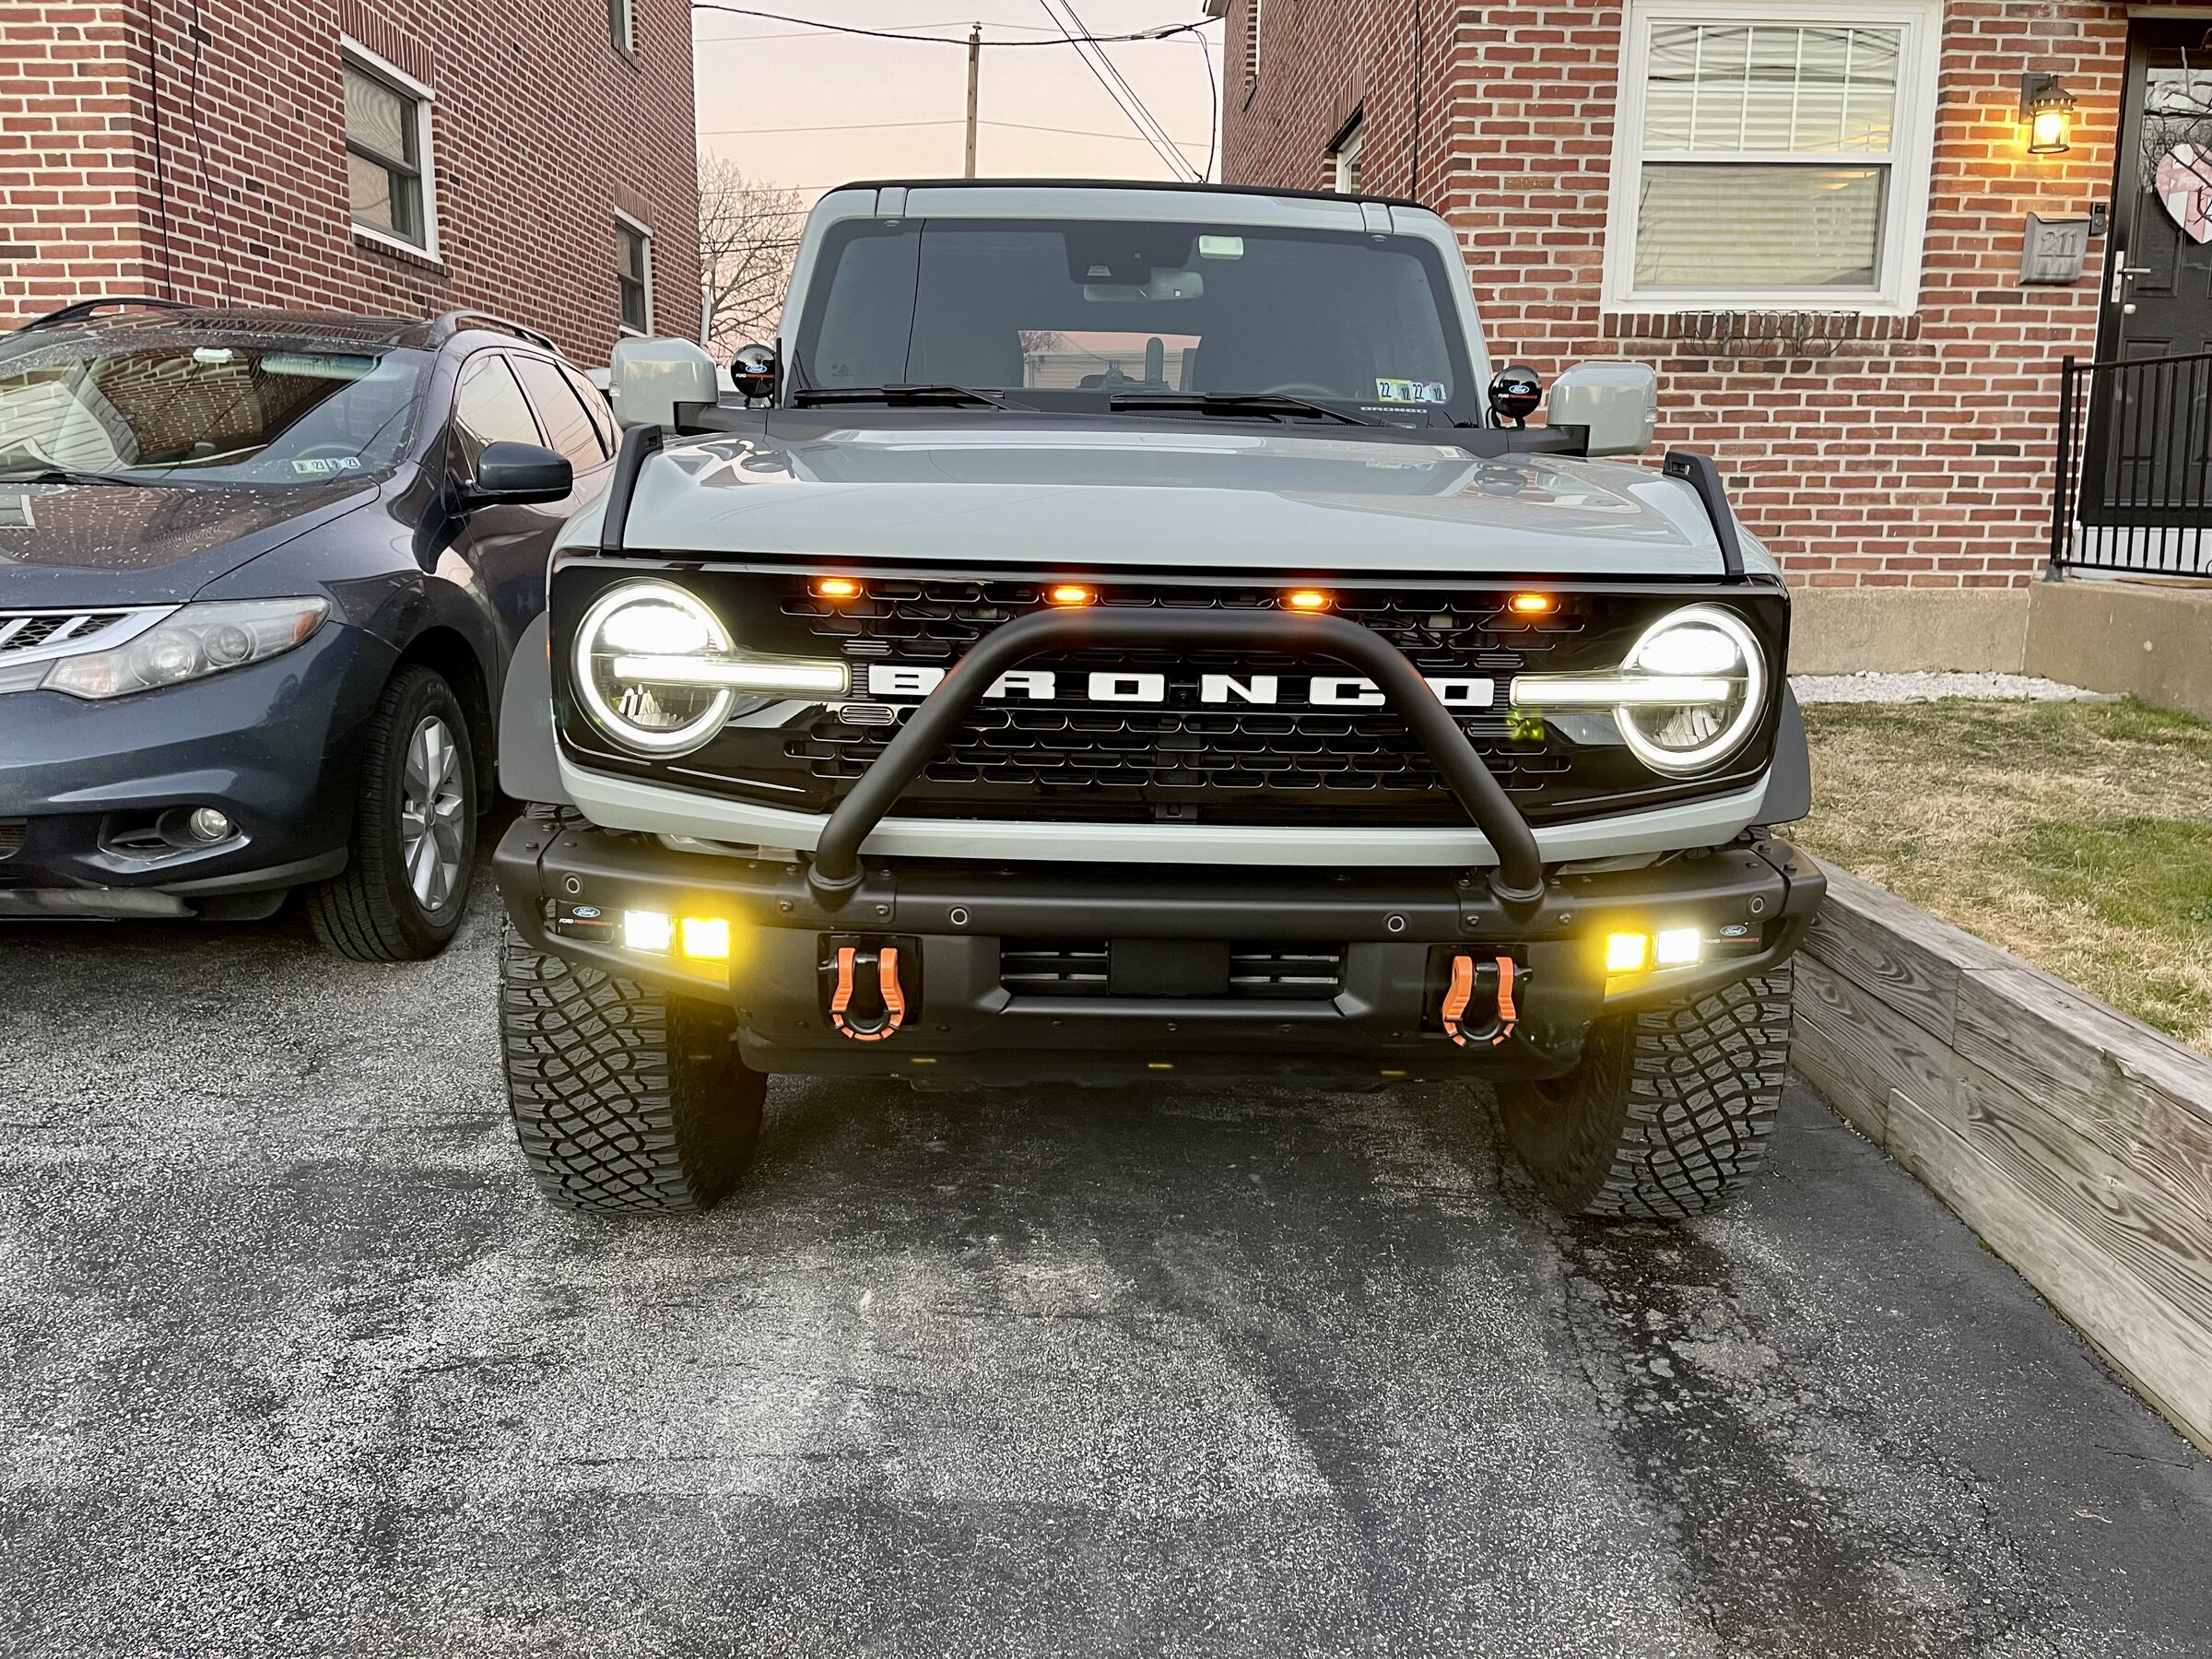 Ford Bronco Swapped out my grille and installed Raptor style lights F1835B68-F9AE-496C-B7D9-27F356840858